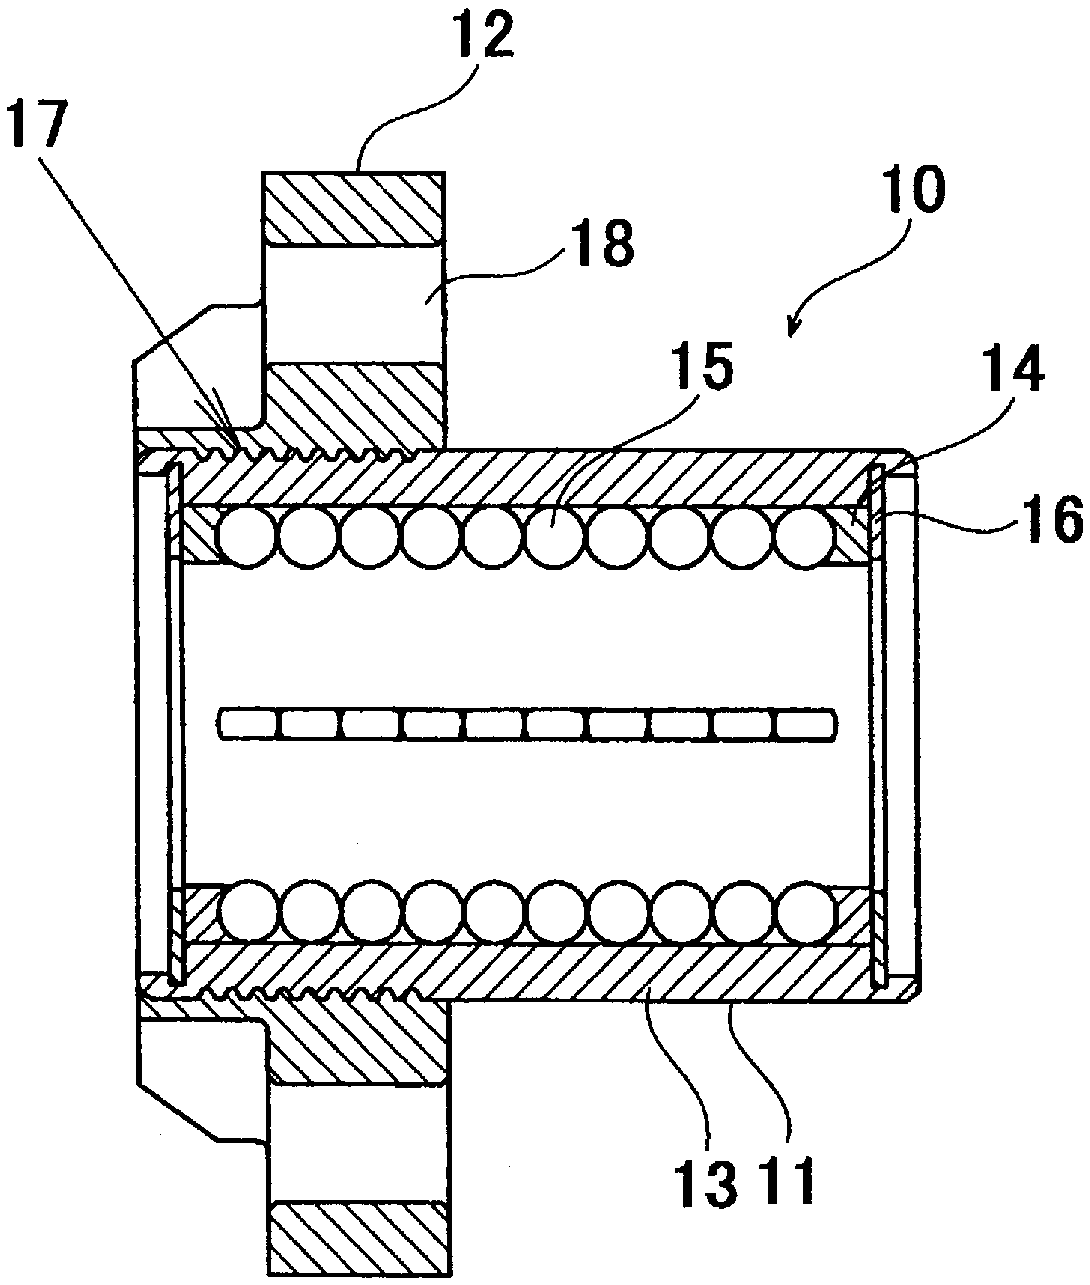 Linear-motion bearing with flange attached